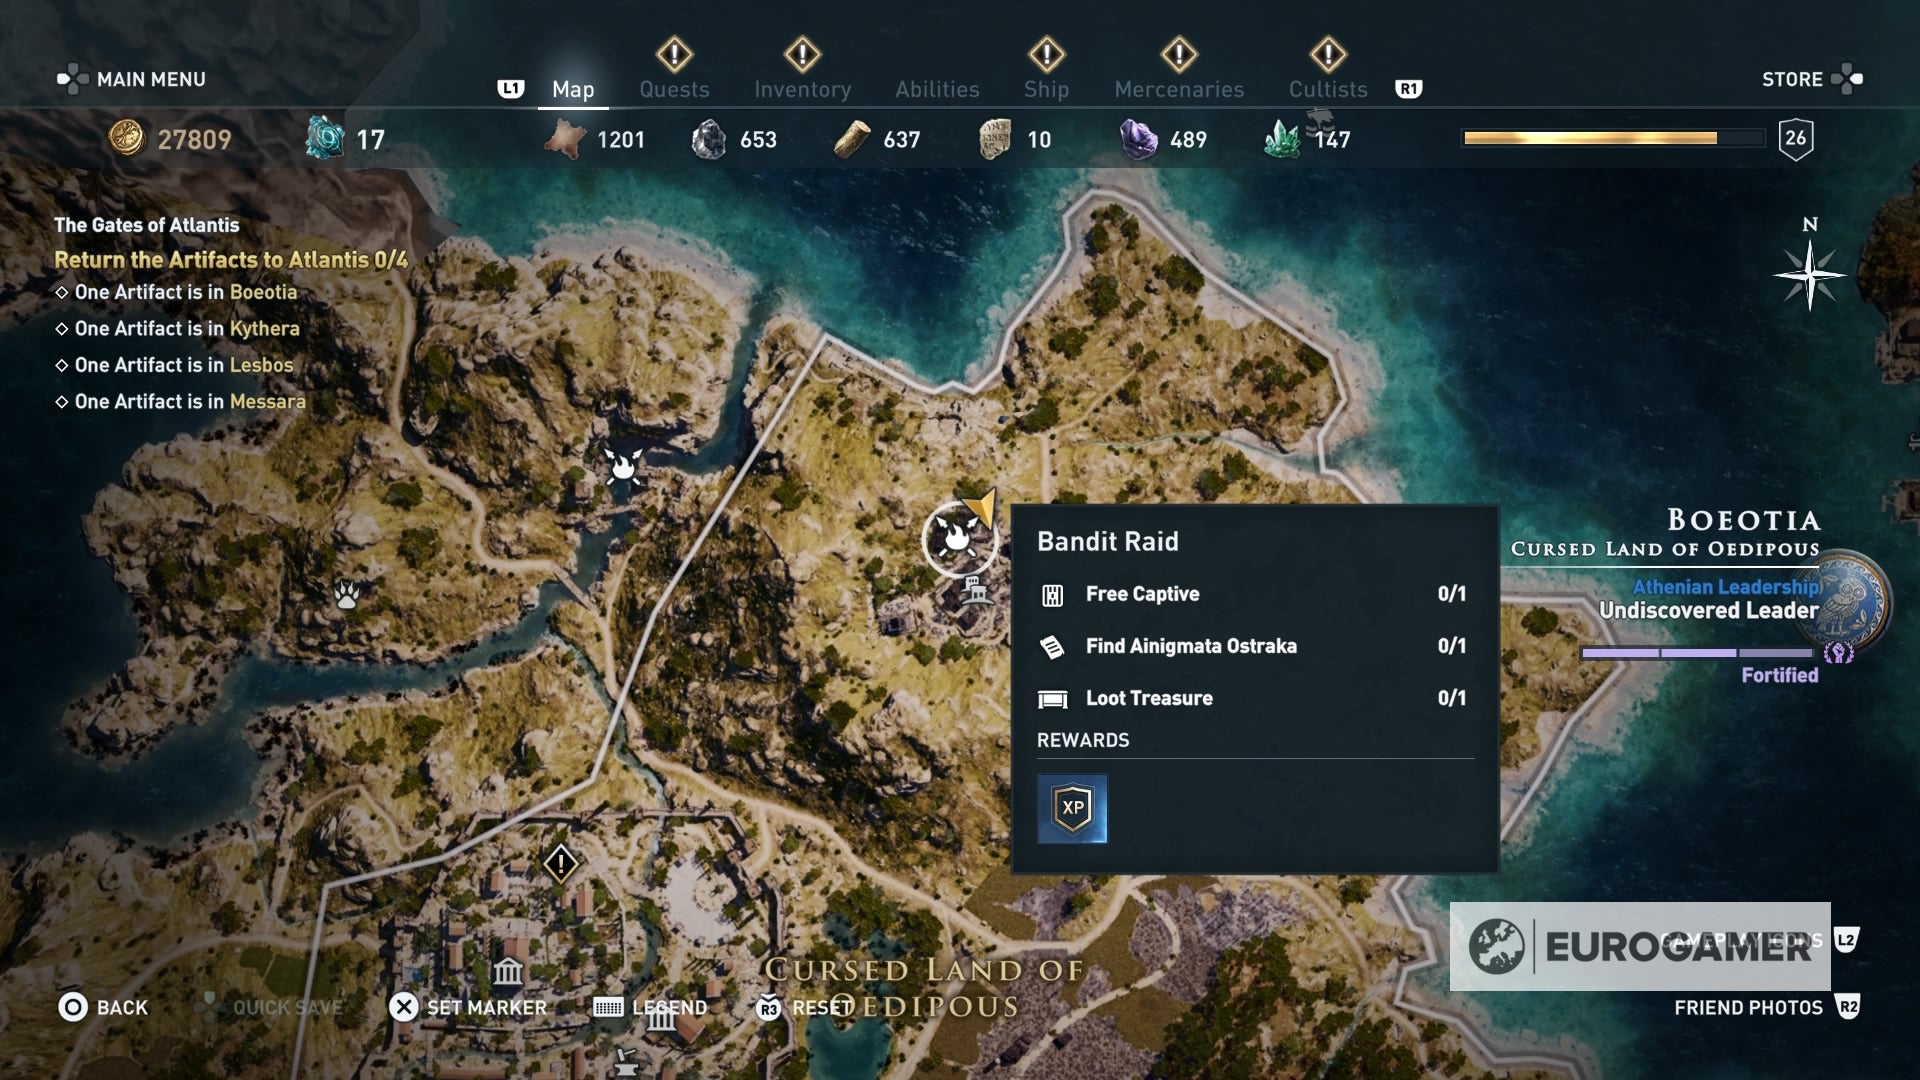 Meander operation aflange Assassin's Creed Odyssey - Stadium Love, Bridging the Gap riddle solutions  and where to find the Thebes Leader's House, Cursed Lands of Oedipus  tablets | Eurogamer.net